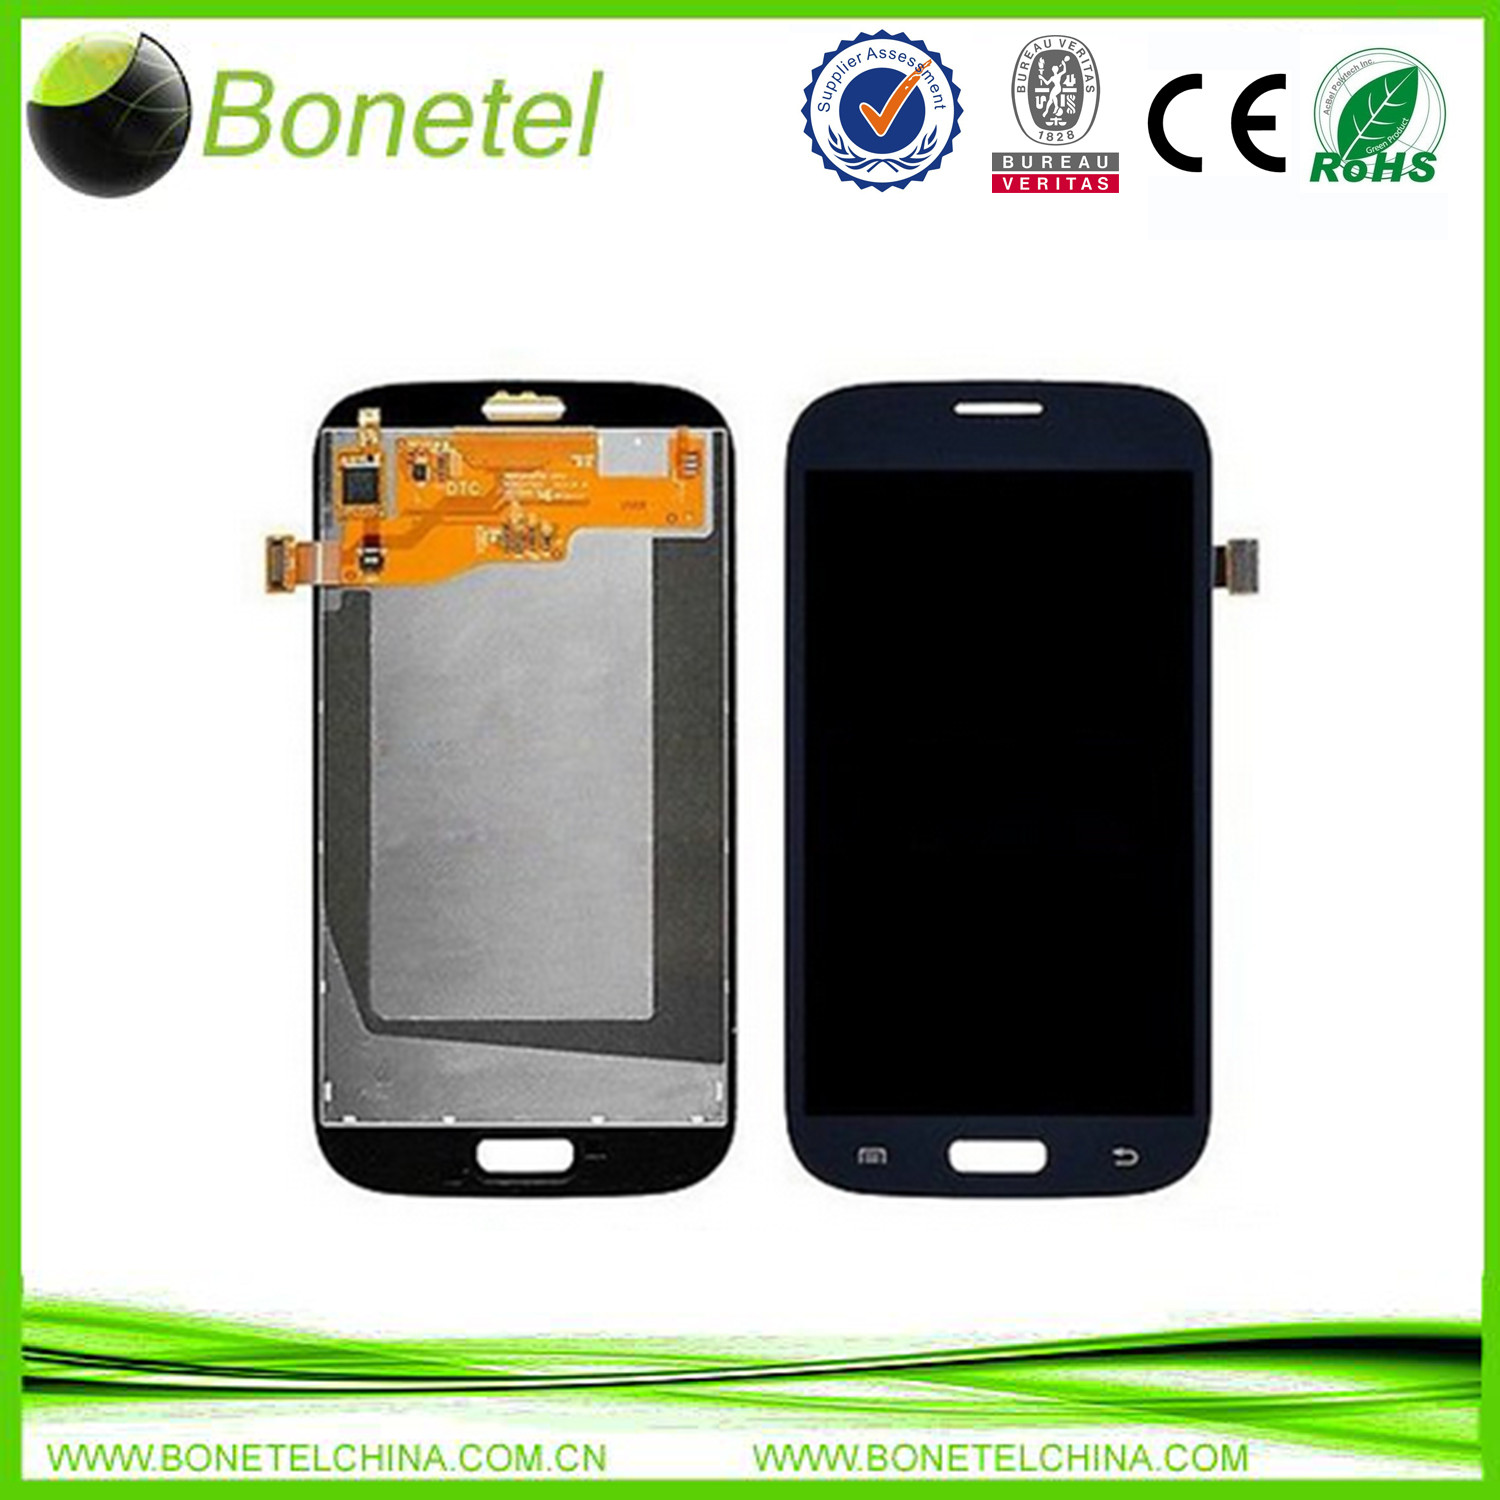 LCD display Touch Screen Digitizer Assembly for Samsung Galaxy Grand i9080 i9081, i9082 with free tools (Blue)